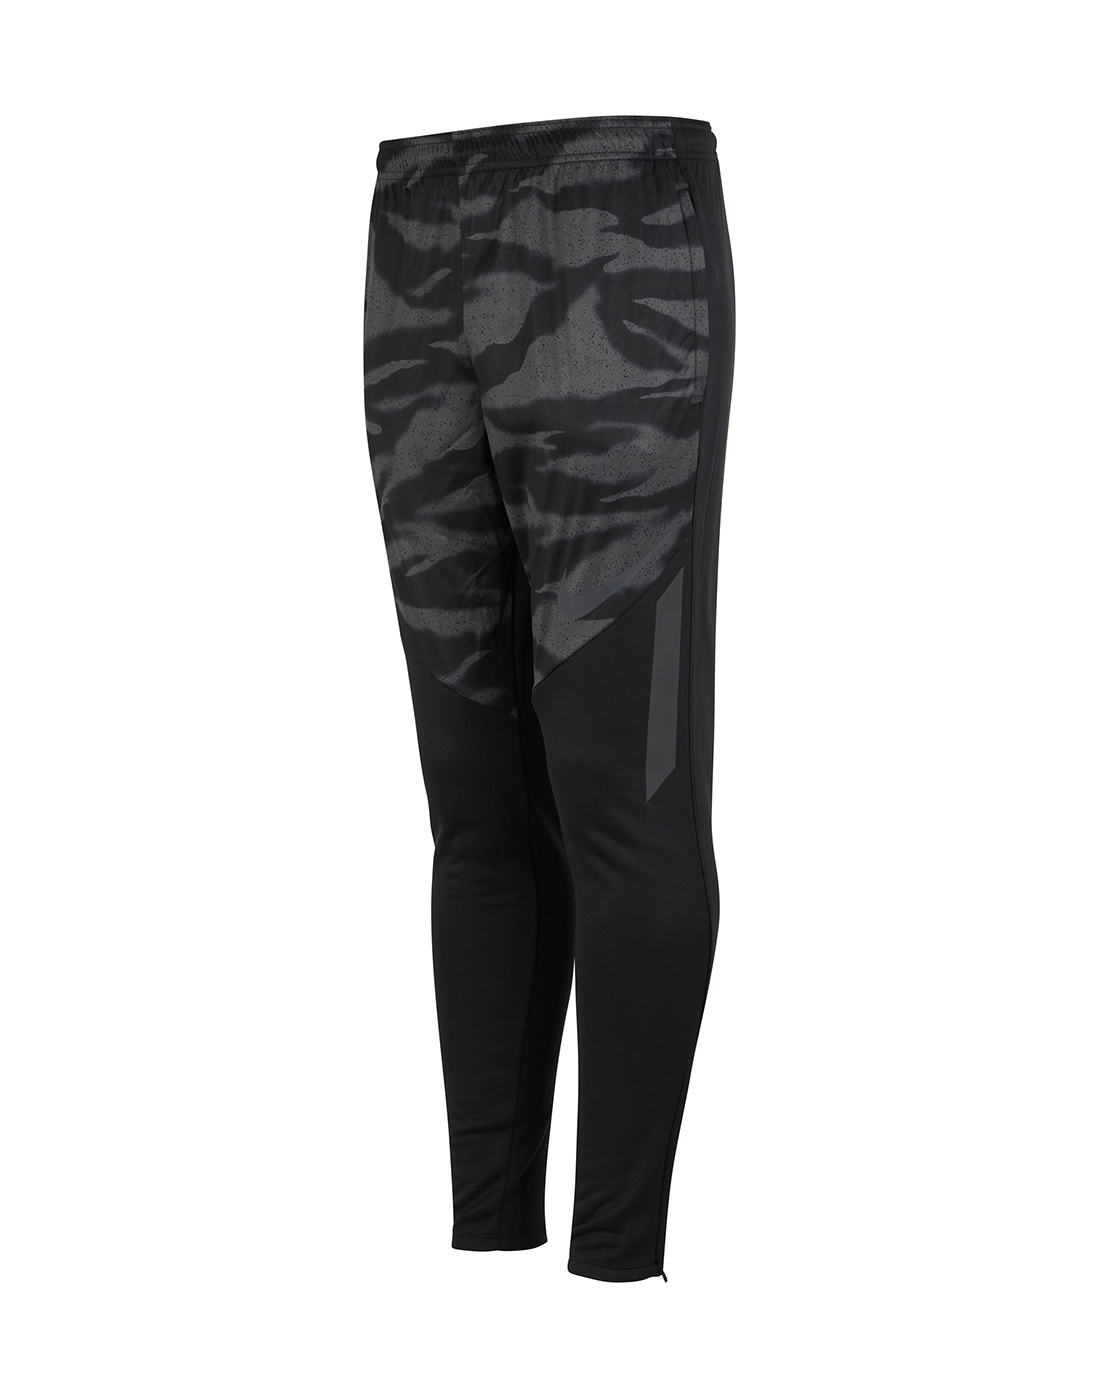 Nike Adult Therma Shield Camo Pant - Black | Life Style Sports IE